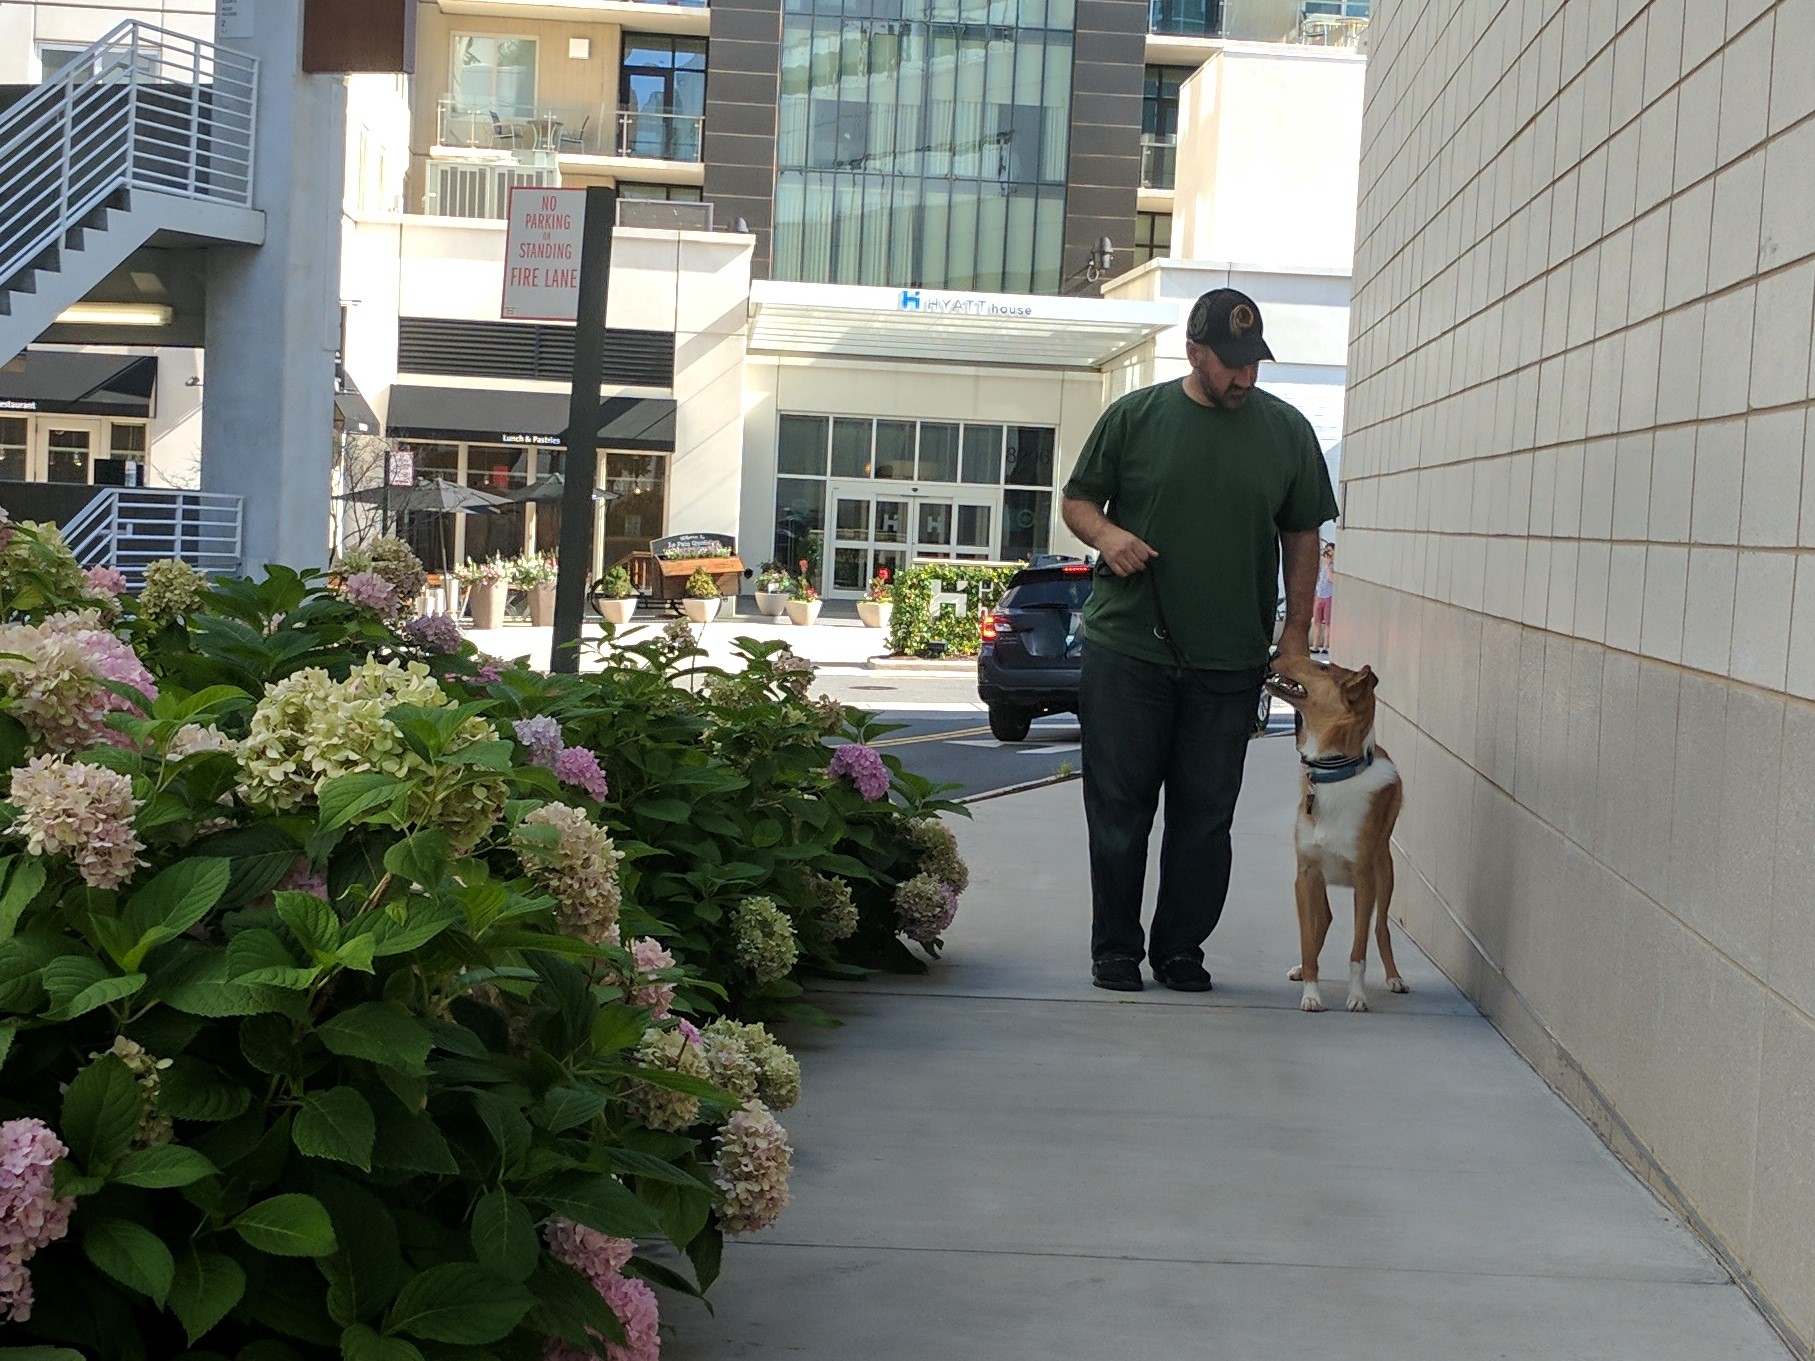 service dog in training with a man walking